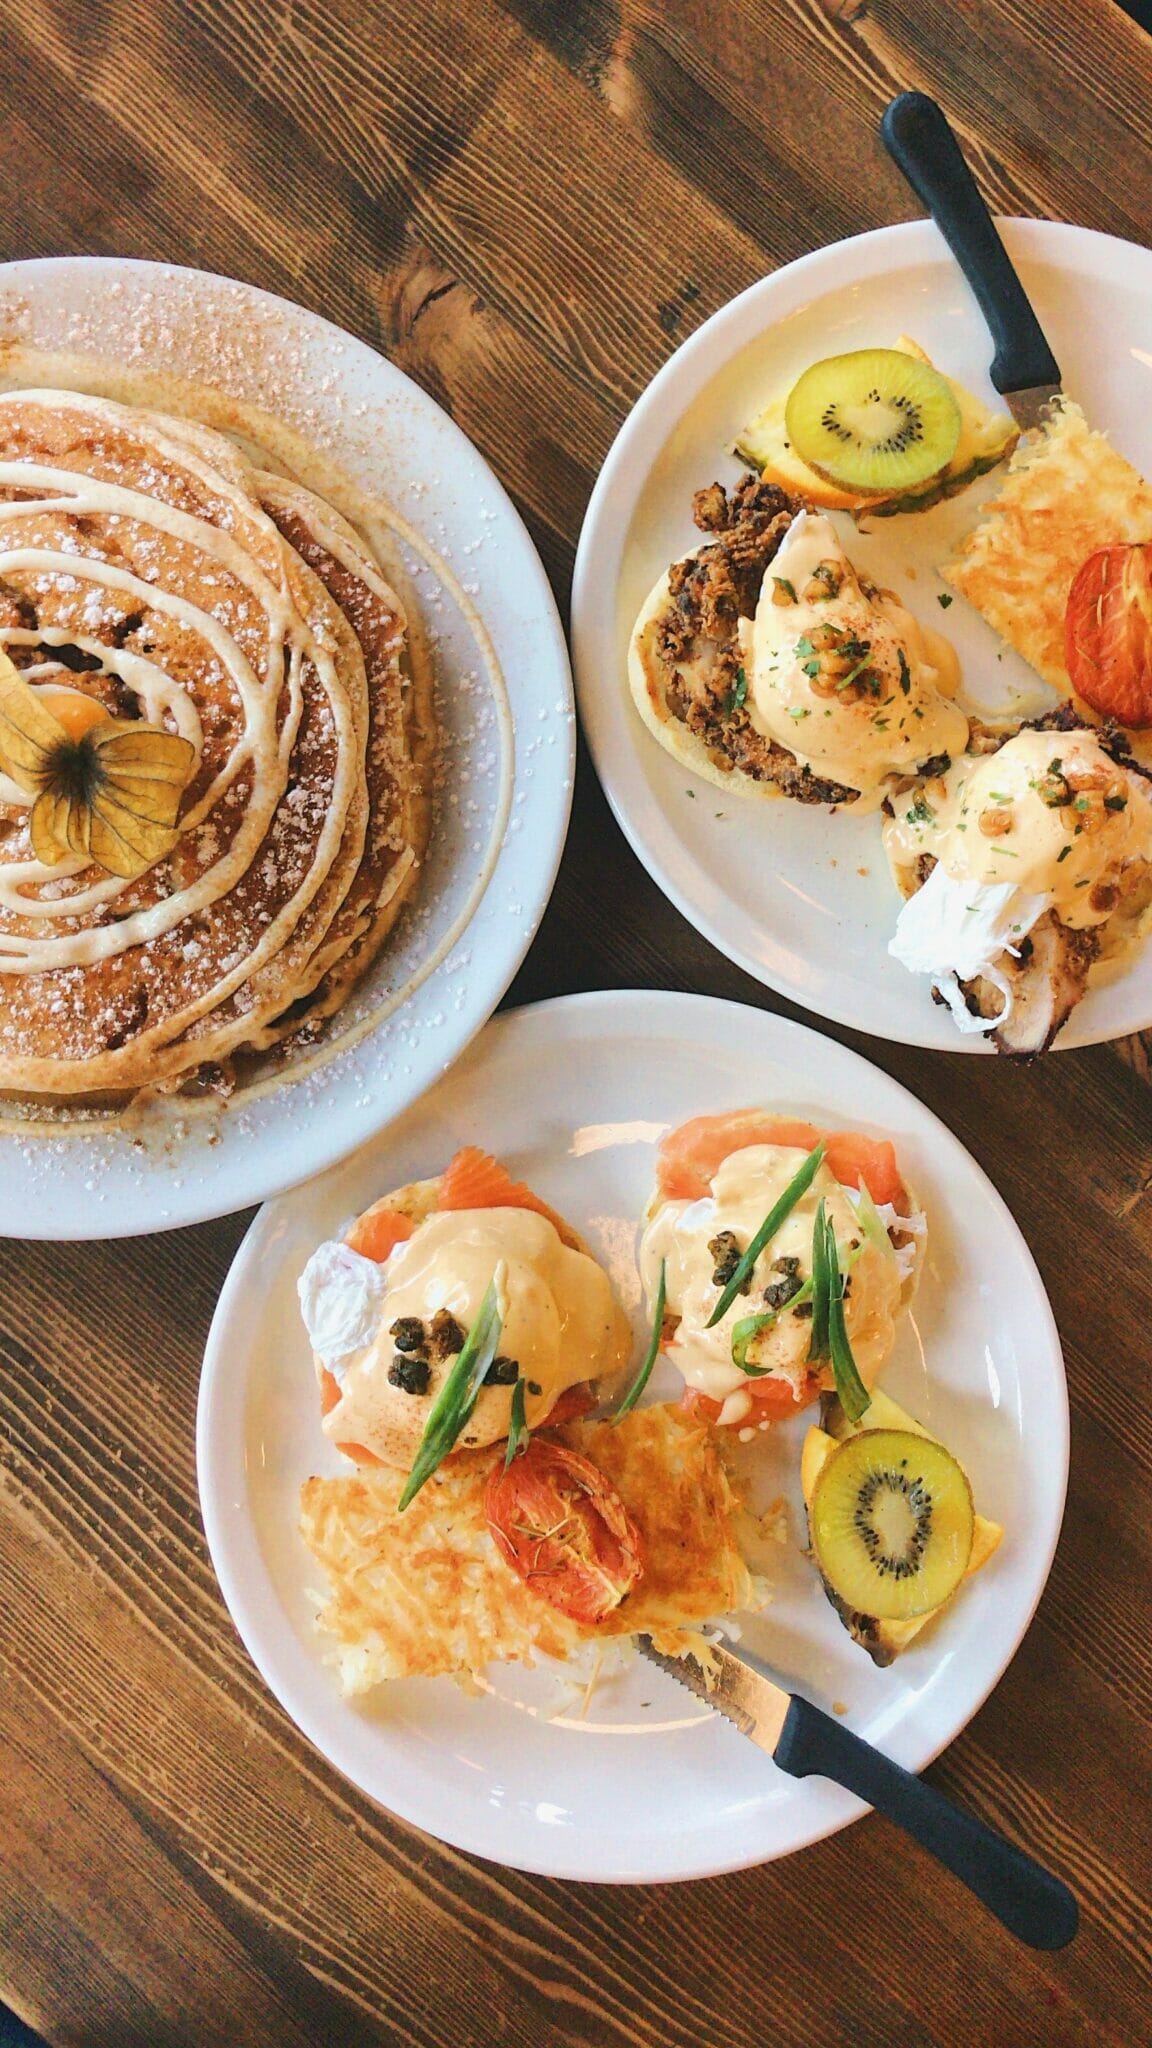 Best Breakfast in Orlando, Florida: 9 Delicious Options - All-American